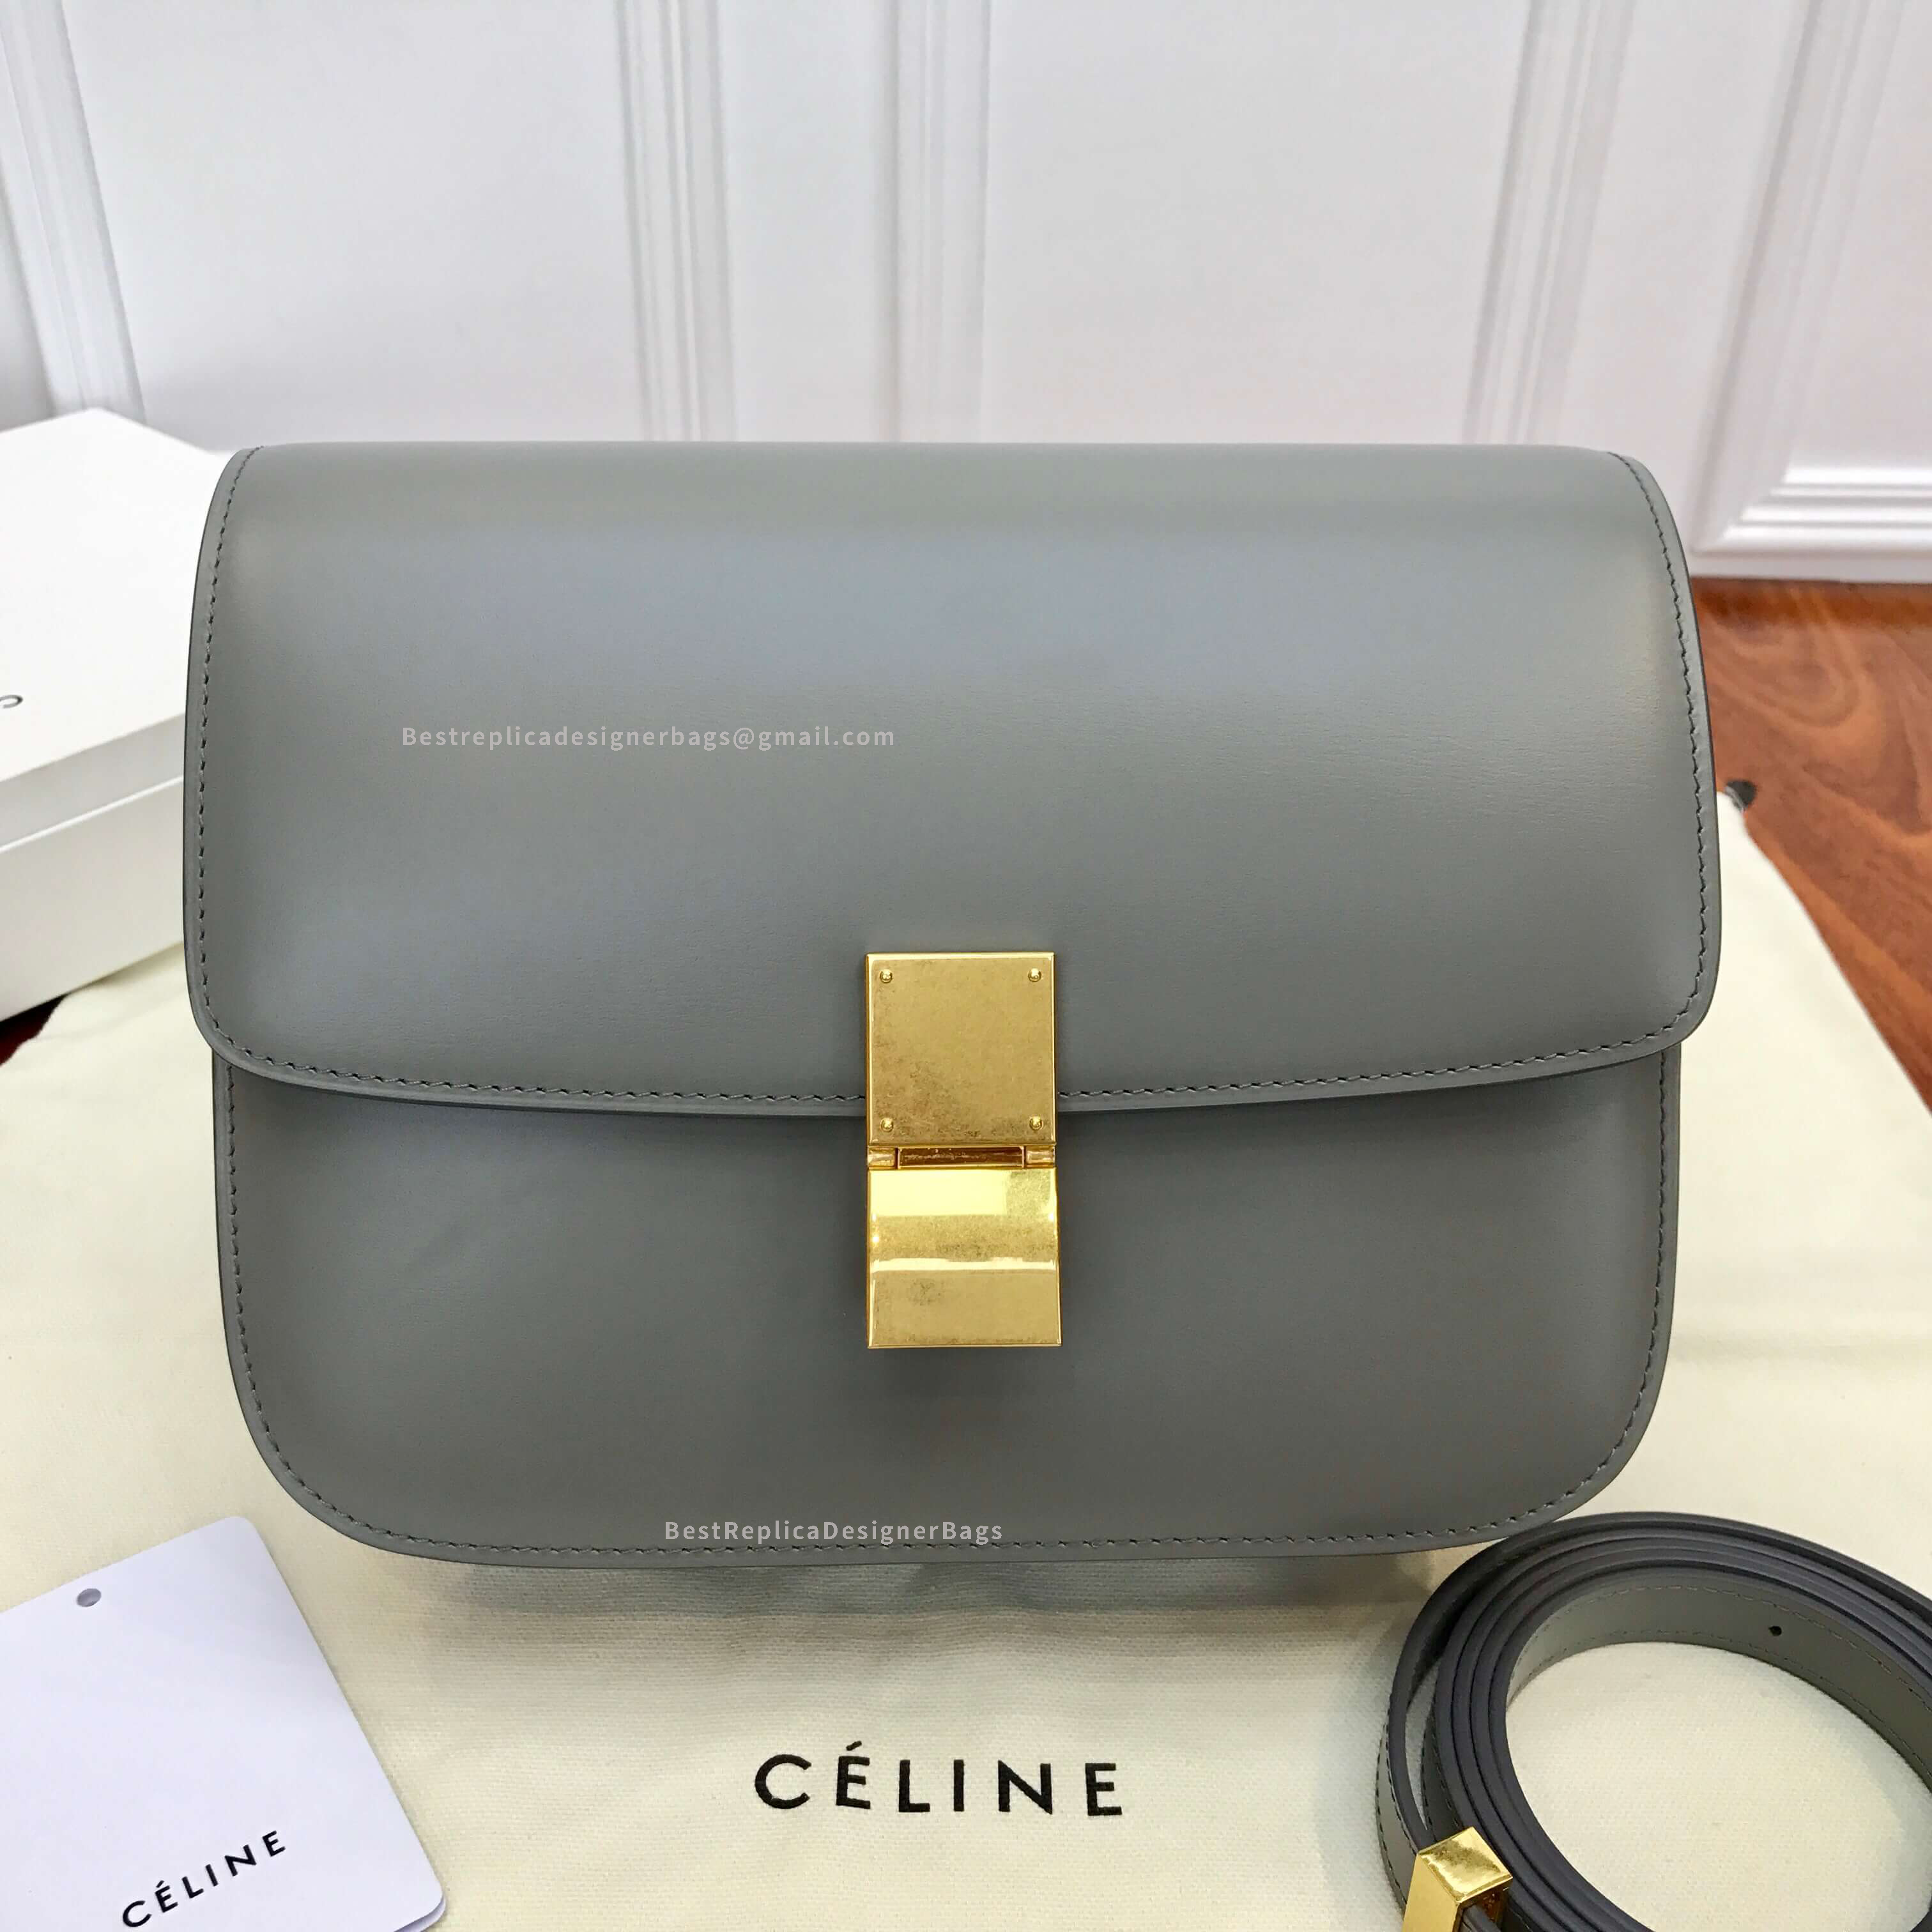 The One That I Sold Away: Celine Medium Box Bag Review {February 2023  Update with Celine Teen Box Bag} — Fairly Curated